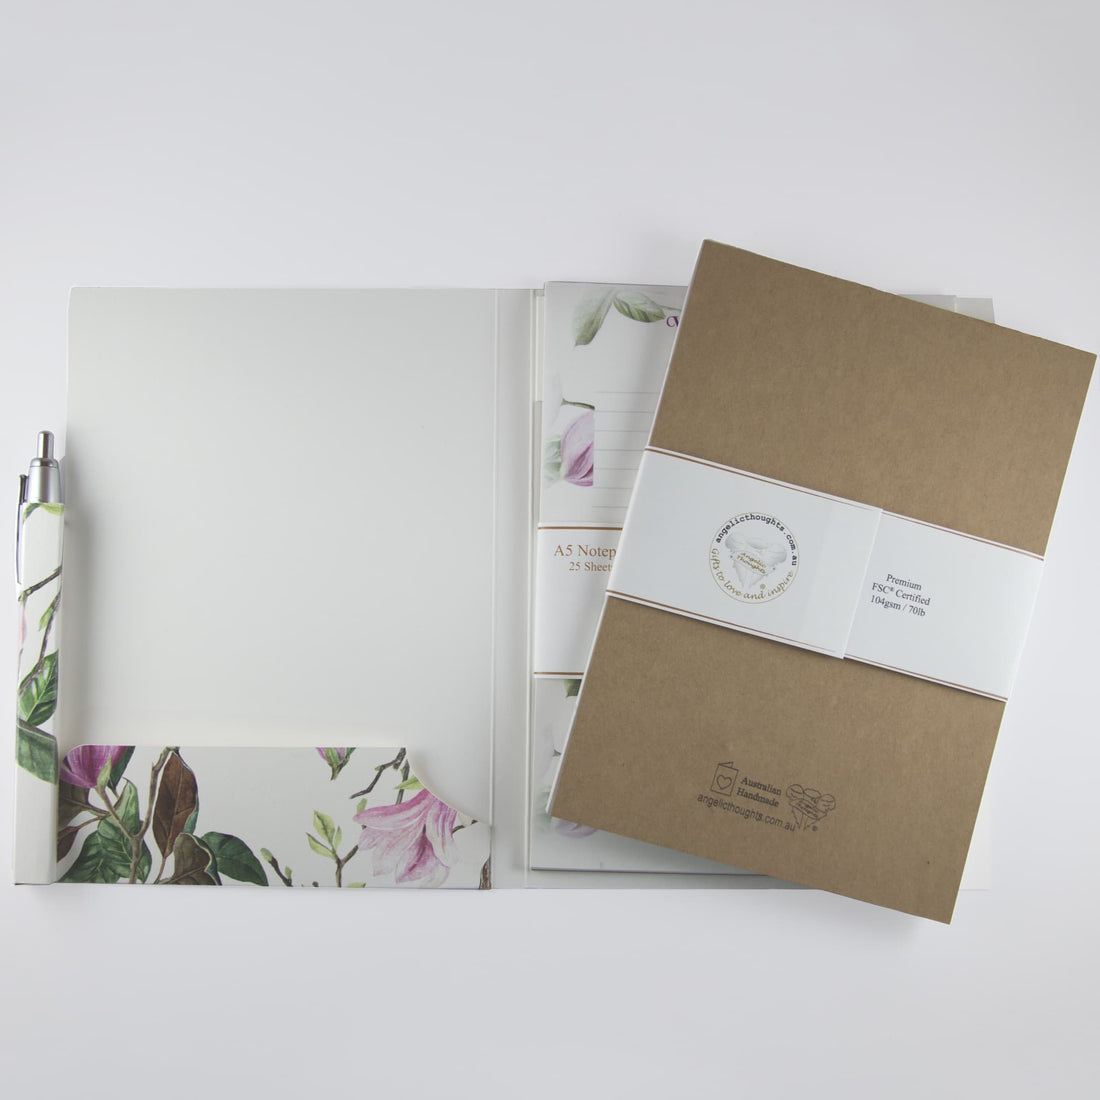 Personalised kraft backed A5 Notepad - shown in Magnolia Compendium Set